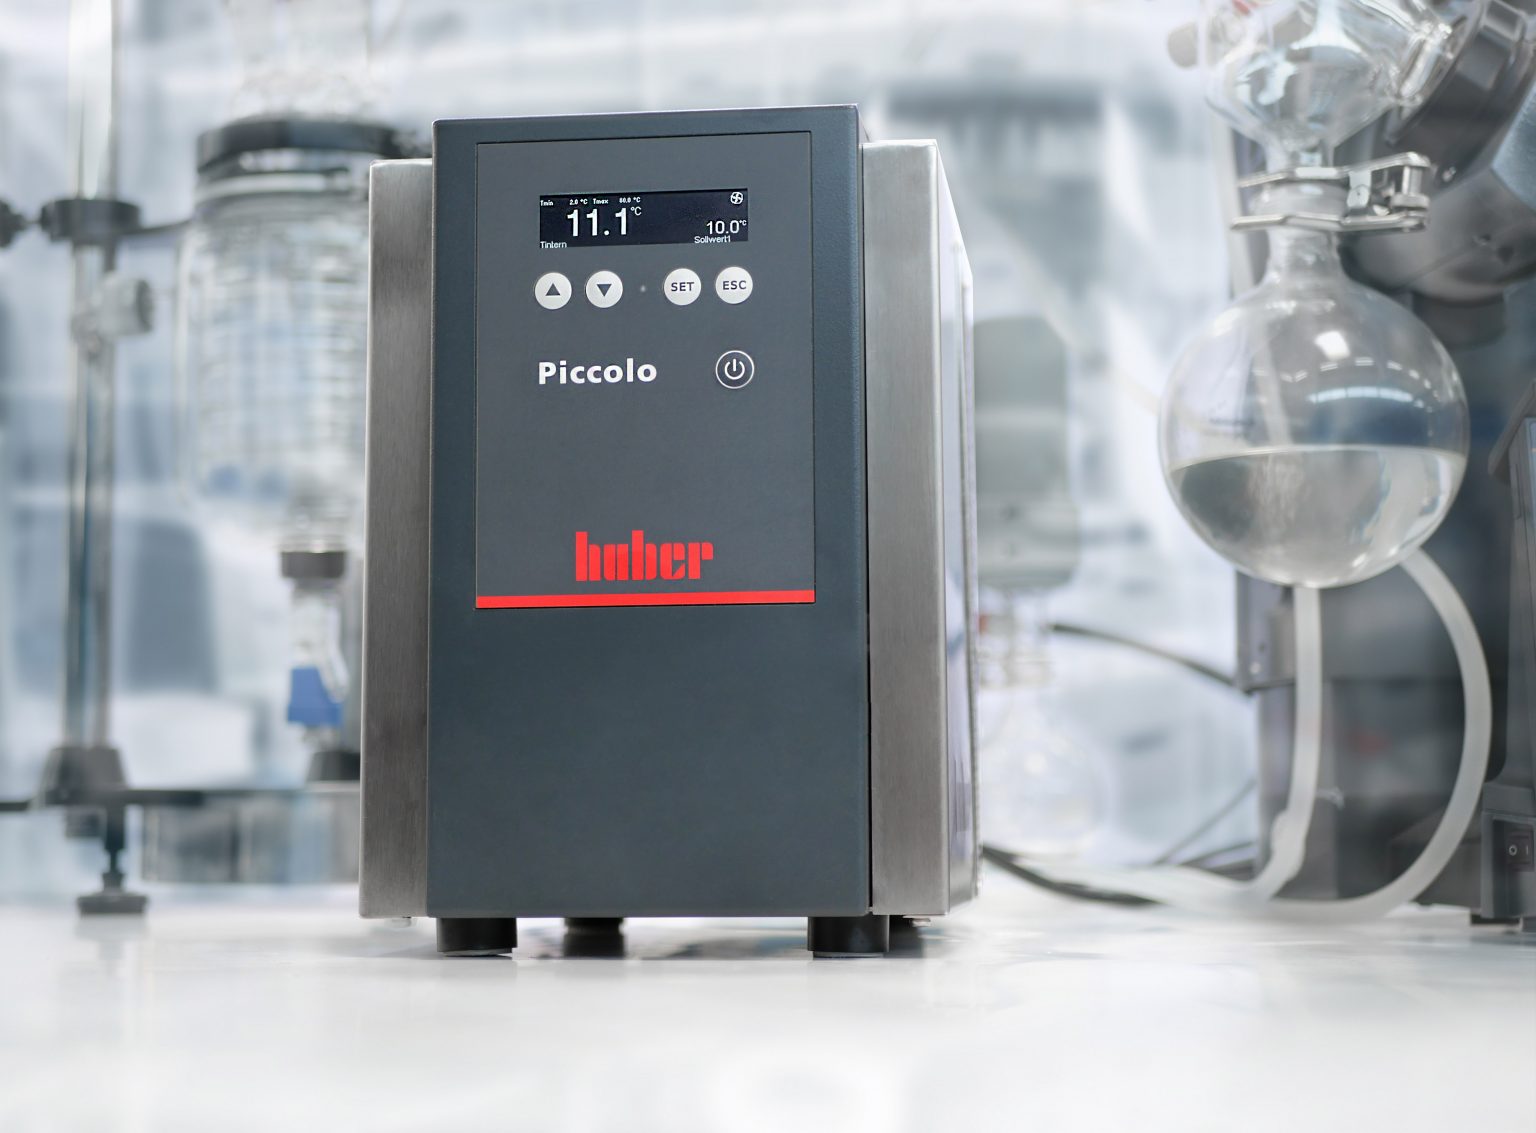 State-of-the-art Piccolo chiller with Peltier technology